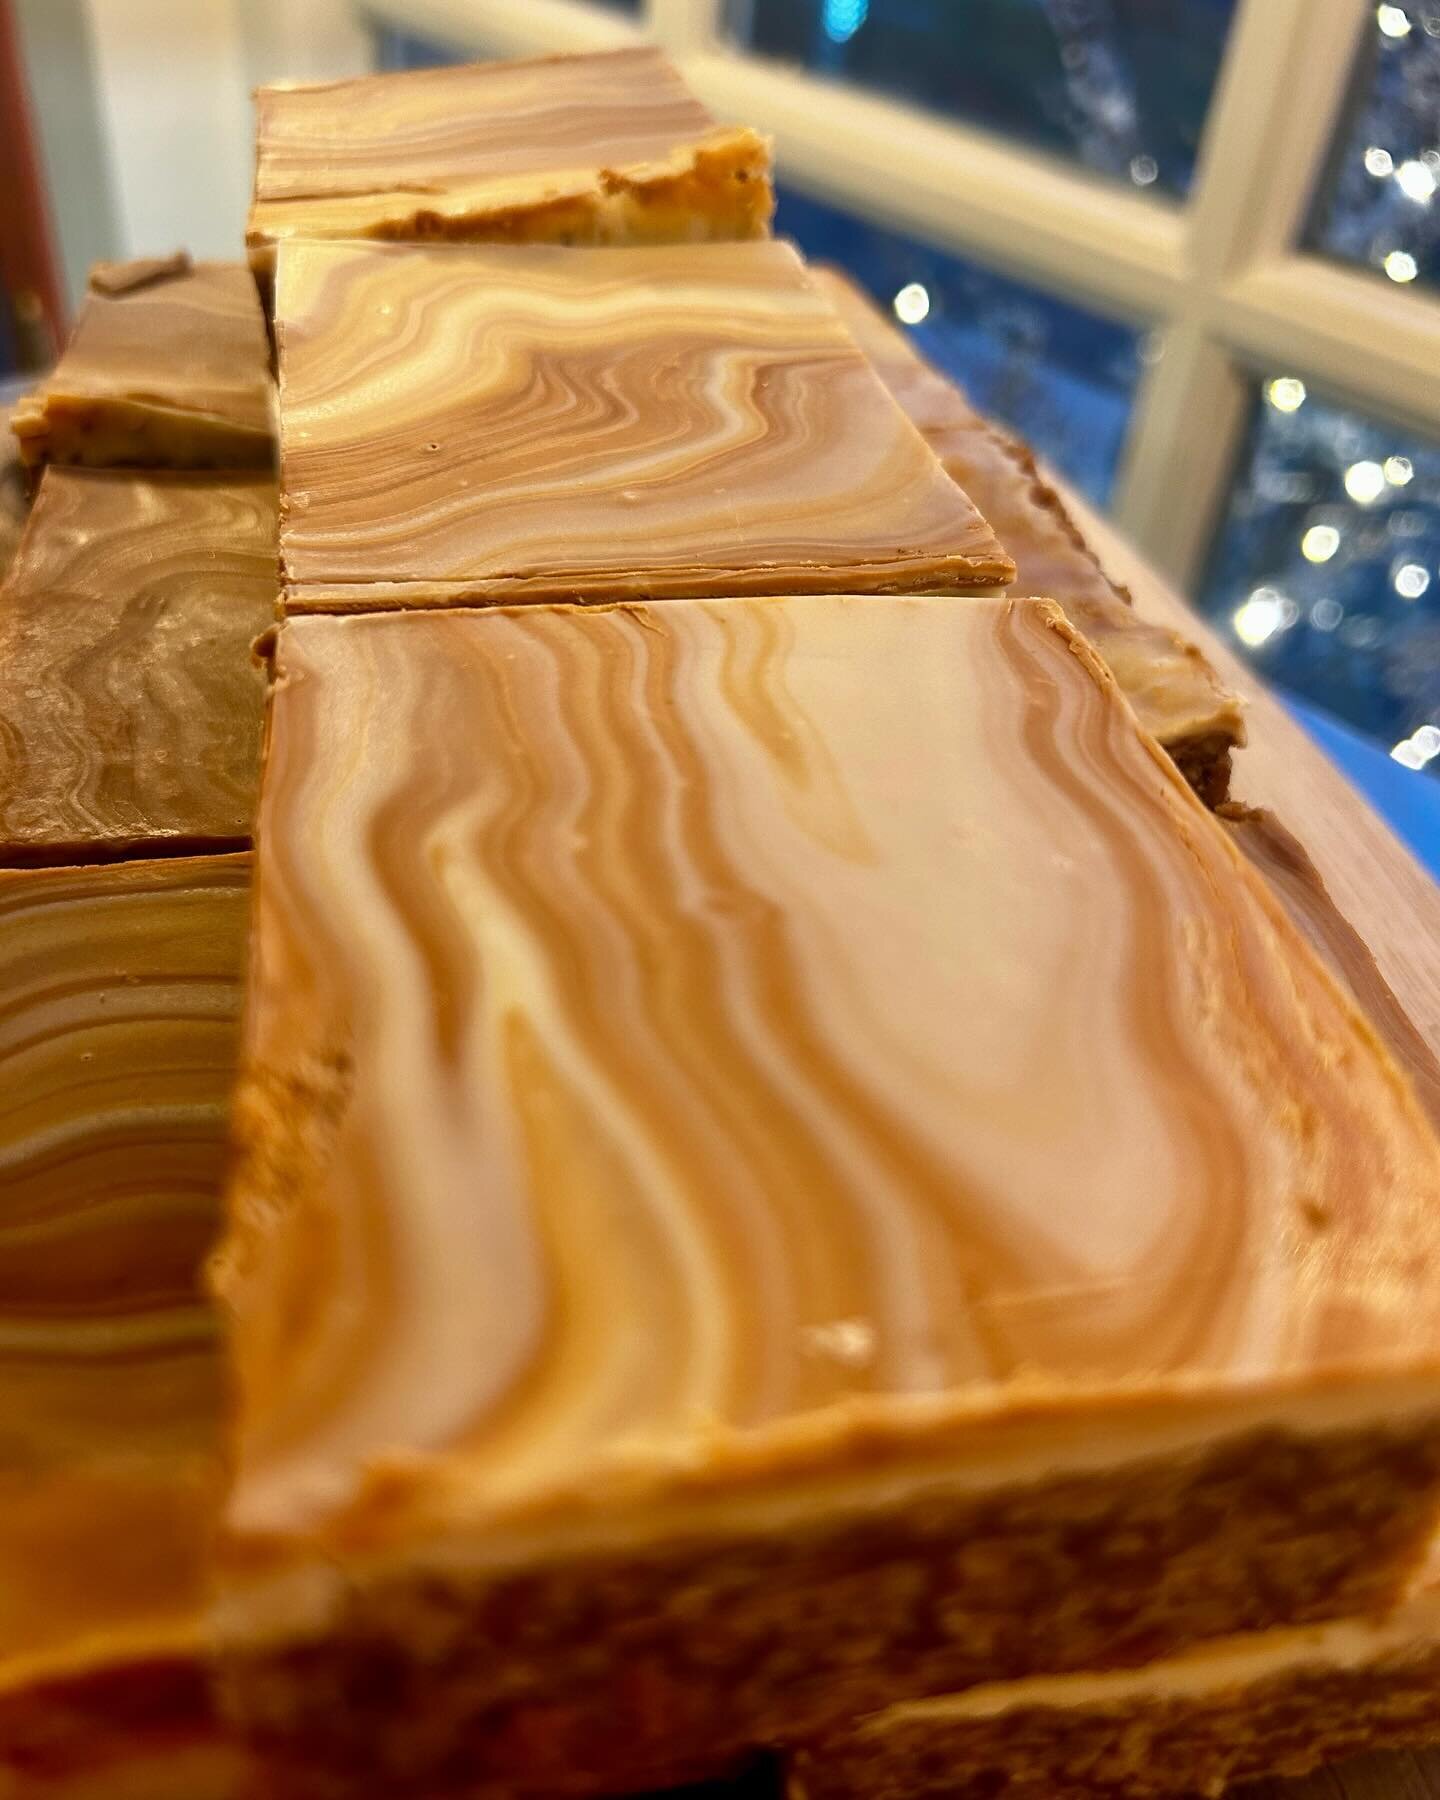 Biscoff is having a bit of a moment in the bakery this week! Why not try our marbled biscoff flapjack, or brand new biscoff stuffed cookies? 🤤🤤